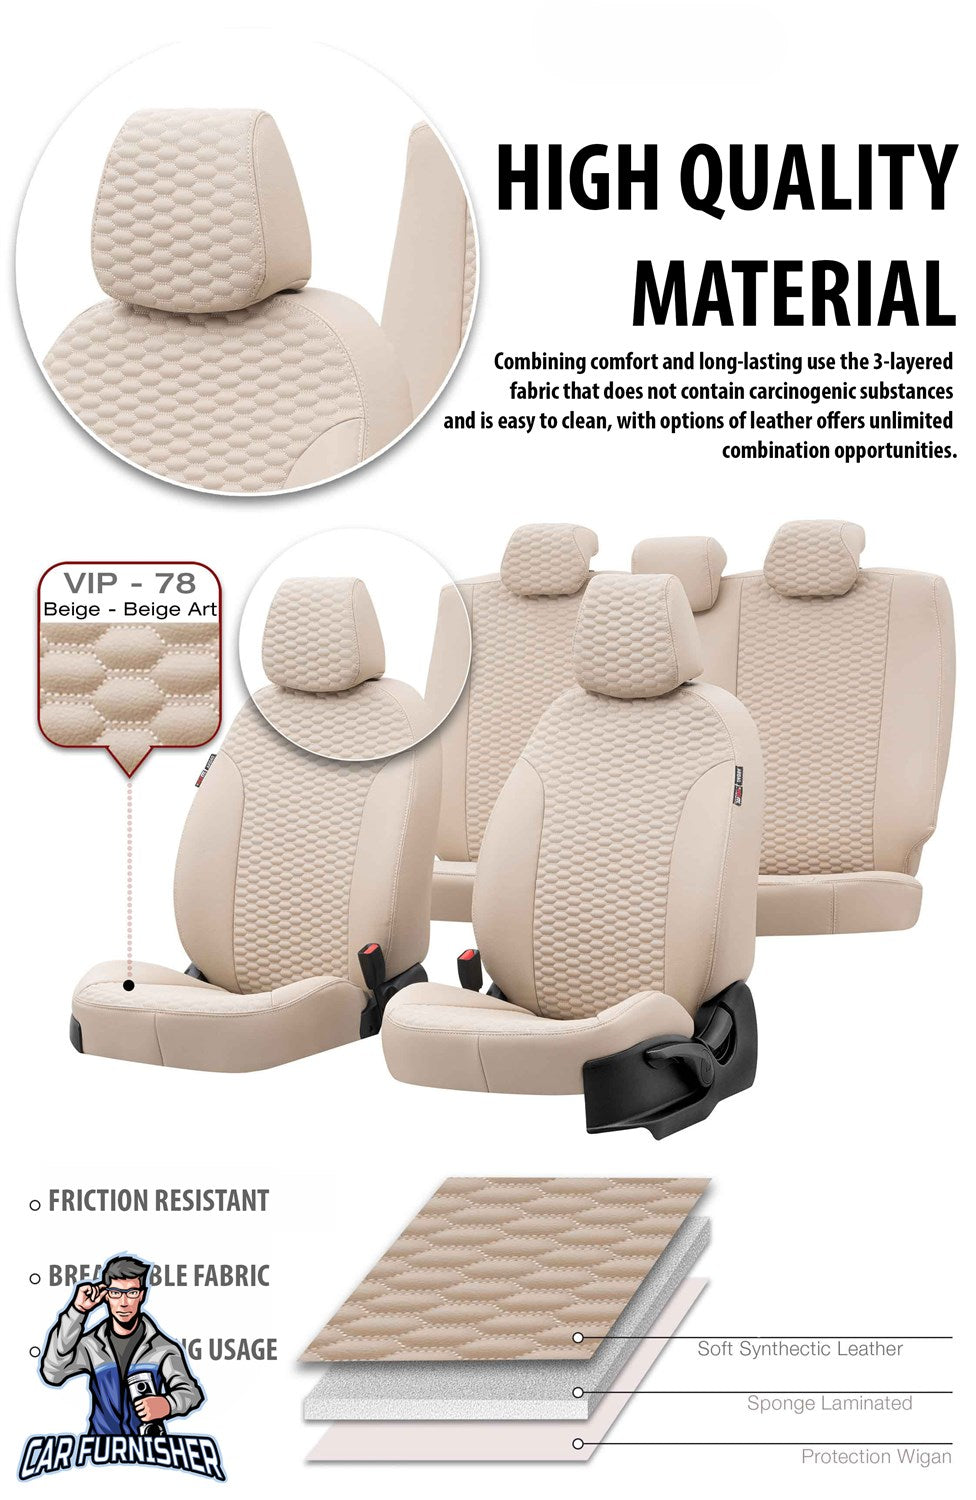 Citroen Jumpy Seat Covers Tokyo Leather Design Ivory Leather